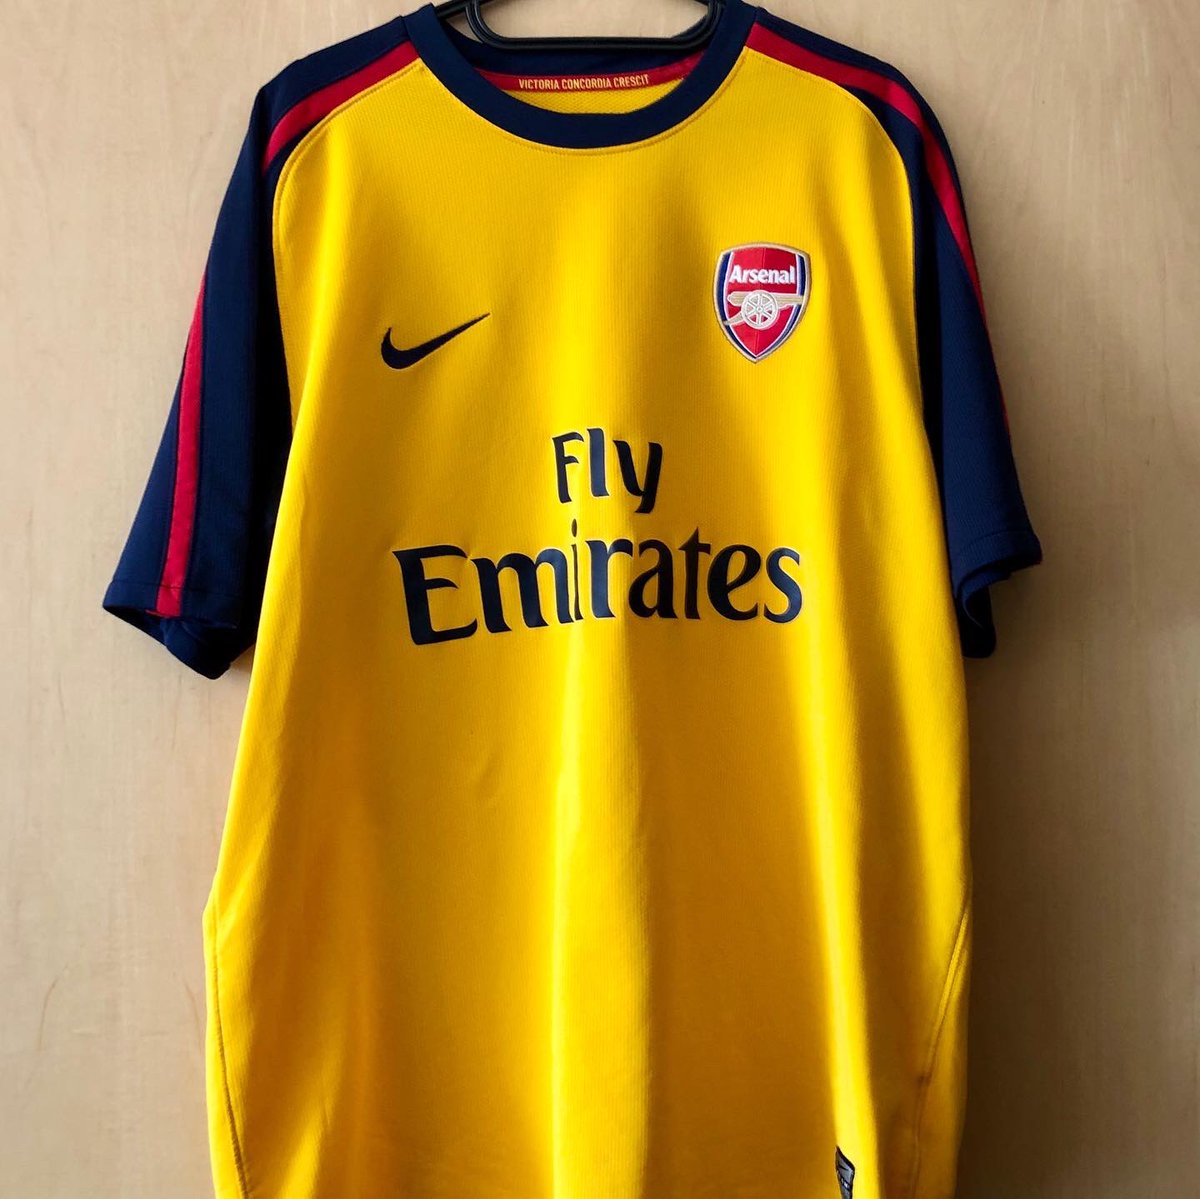 . @ArsenalAway Kit, 2008/09NikePersonalised:  @cesc4official, 4Just a beautiful shirt carrying the name of one of the best midfielders to ever grace the Premier League. Fàbregas was awarded the Arsenal captaincy that year. #Gunners  #CescFabregas  #HomeShirt